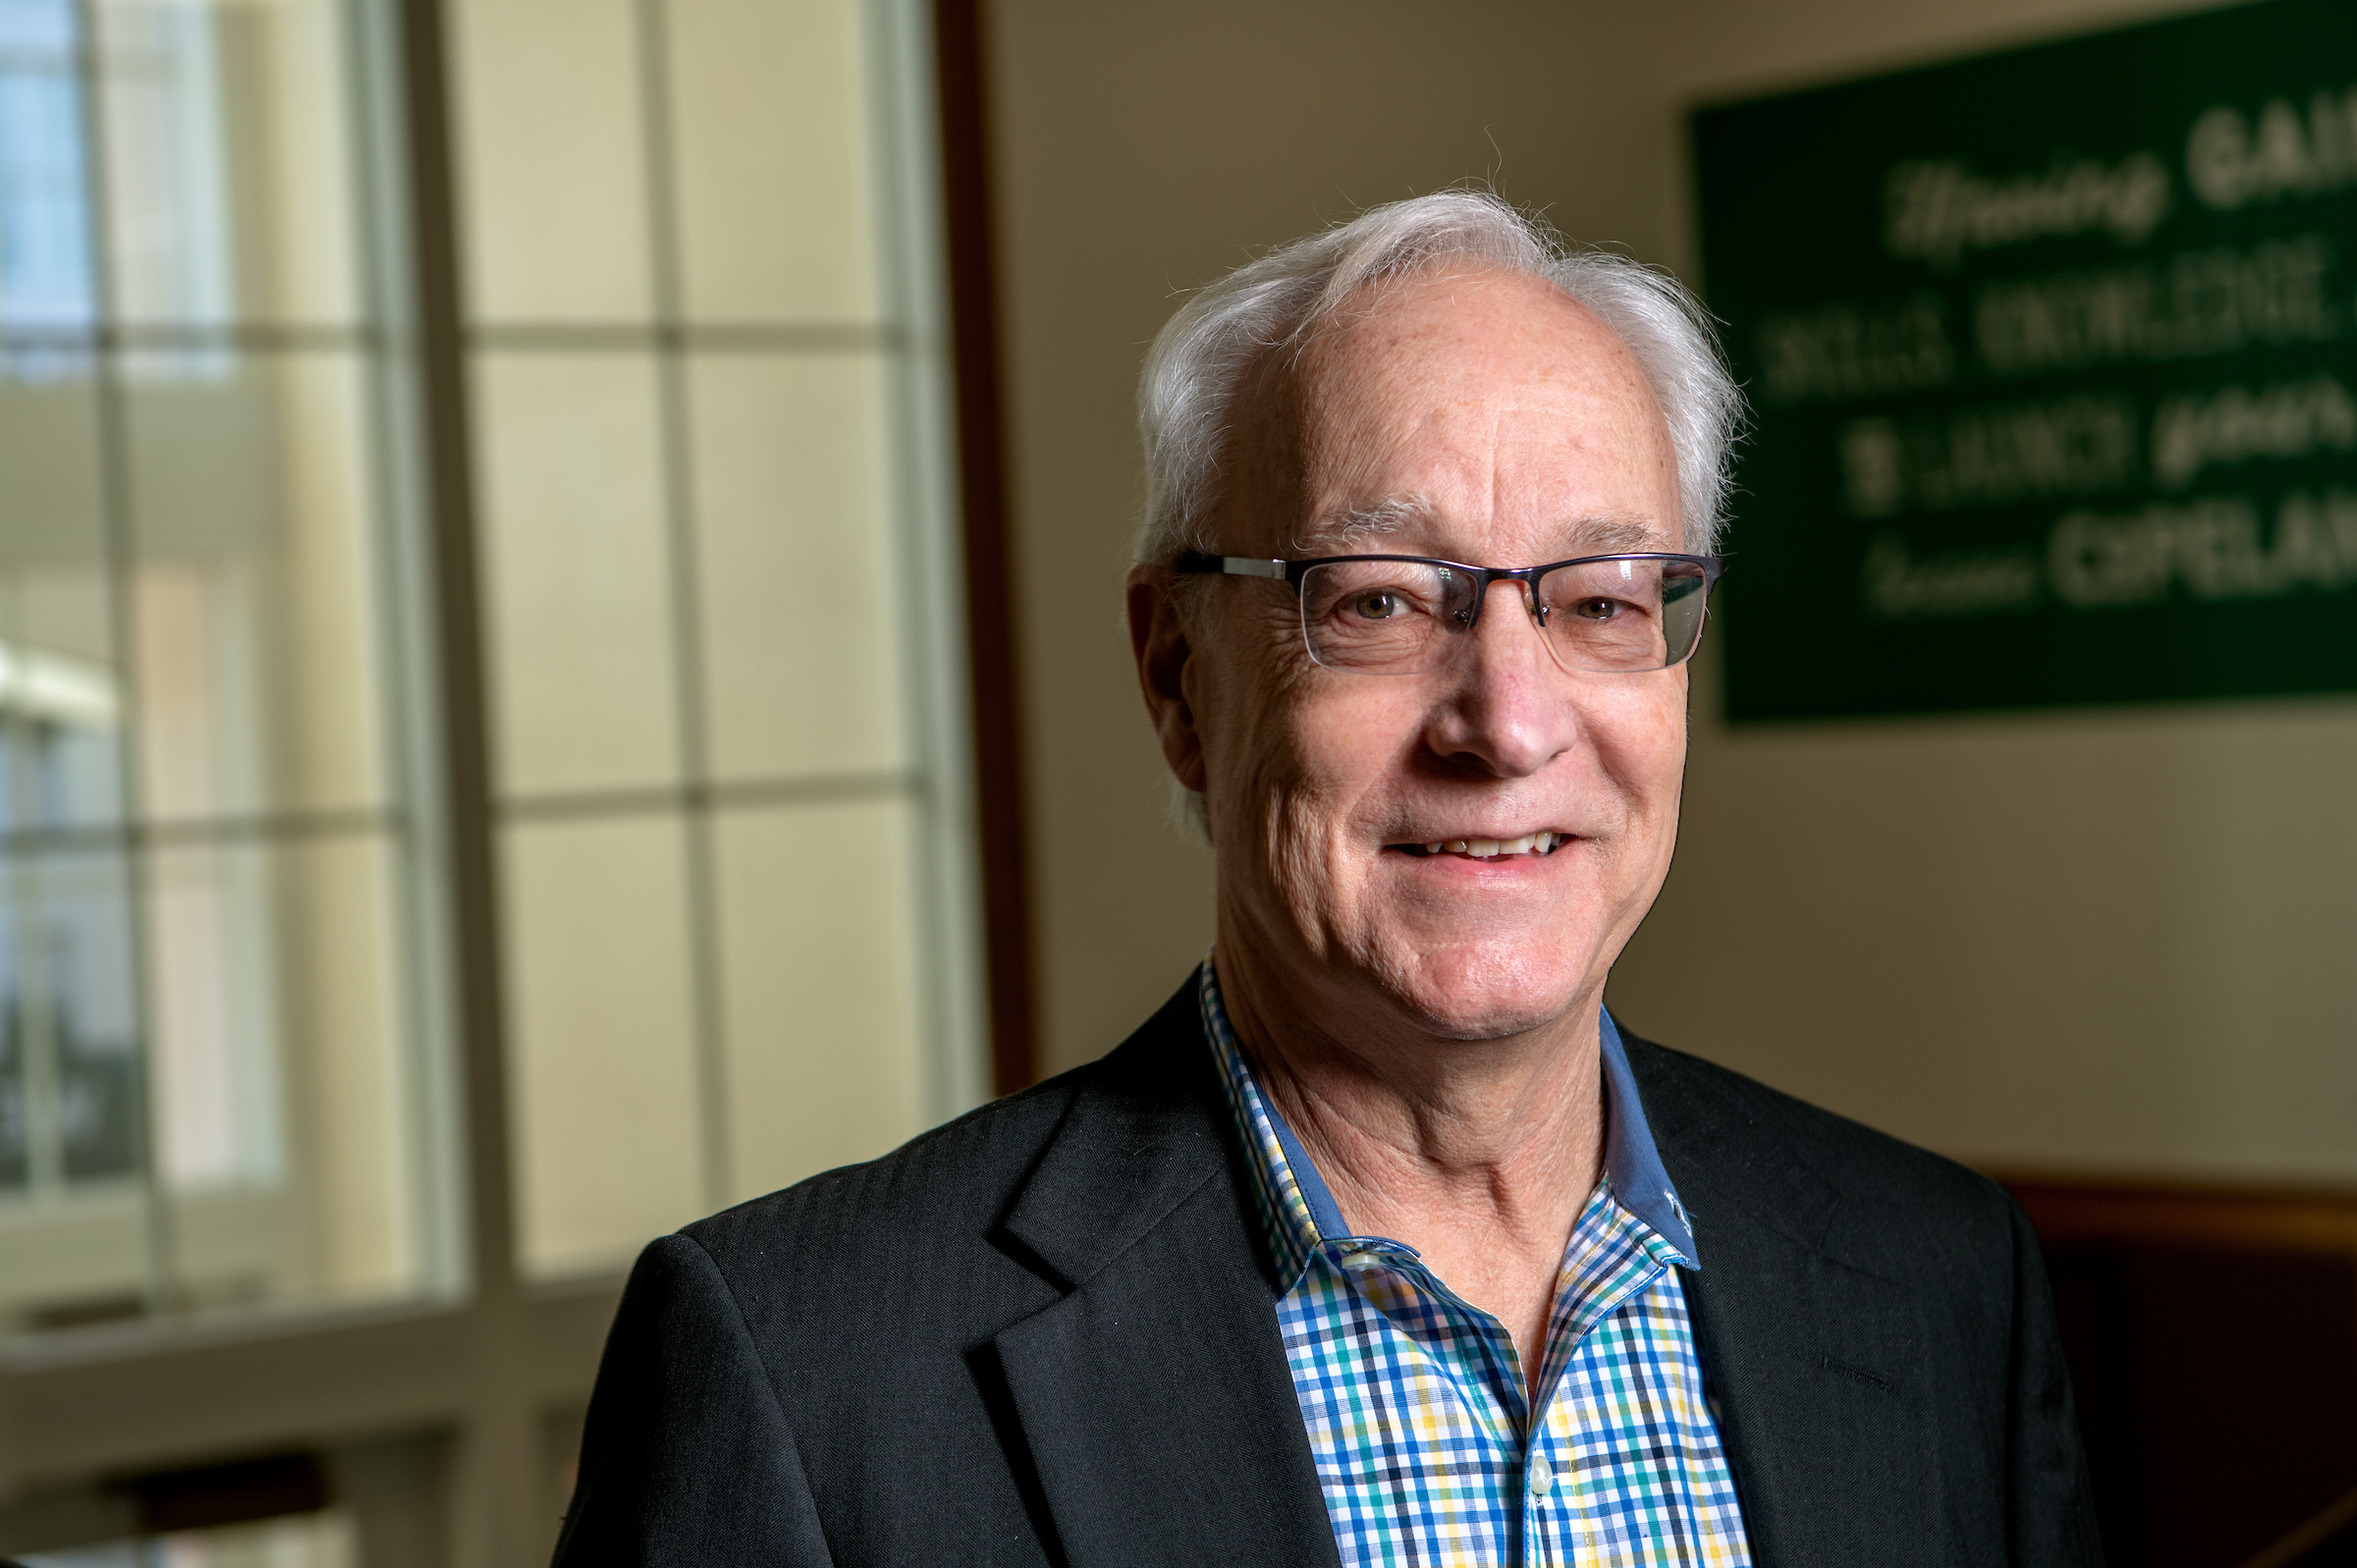 Hugh Sherman, former dean of the College of Business